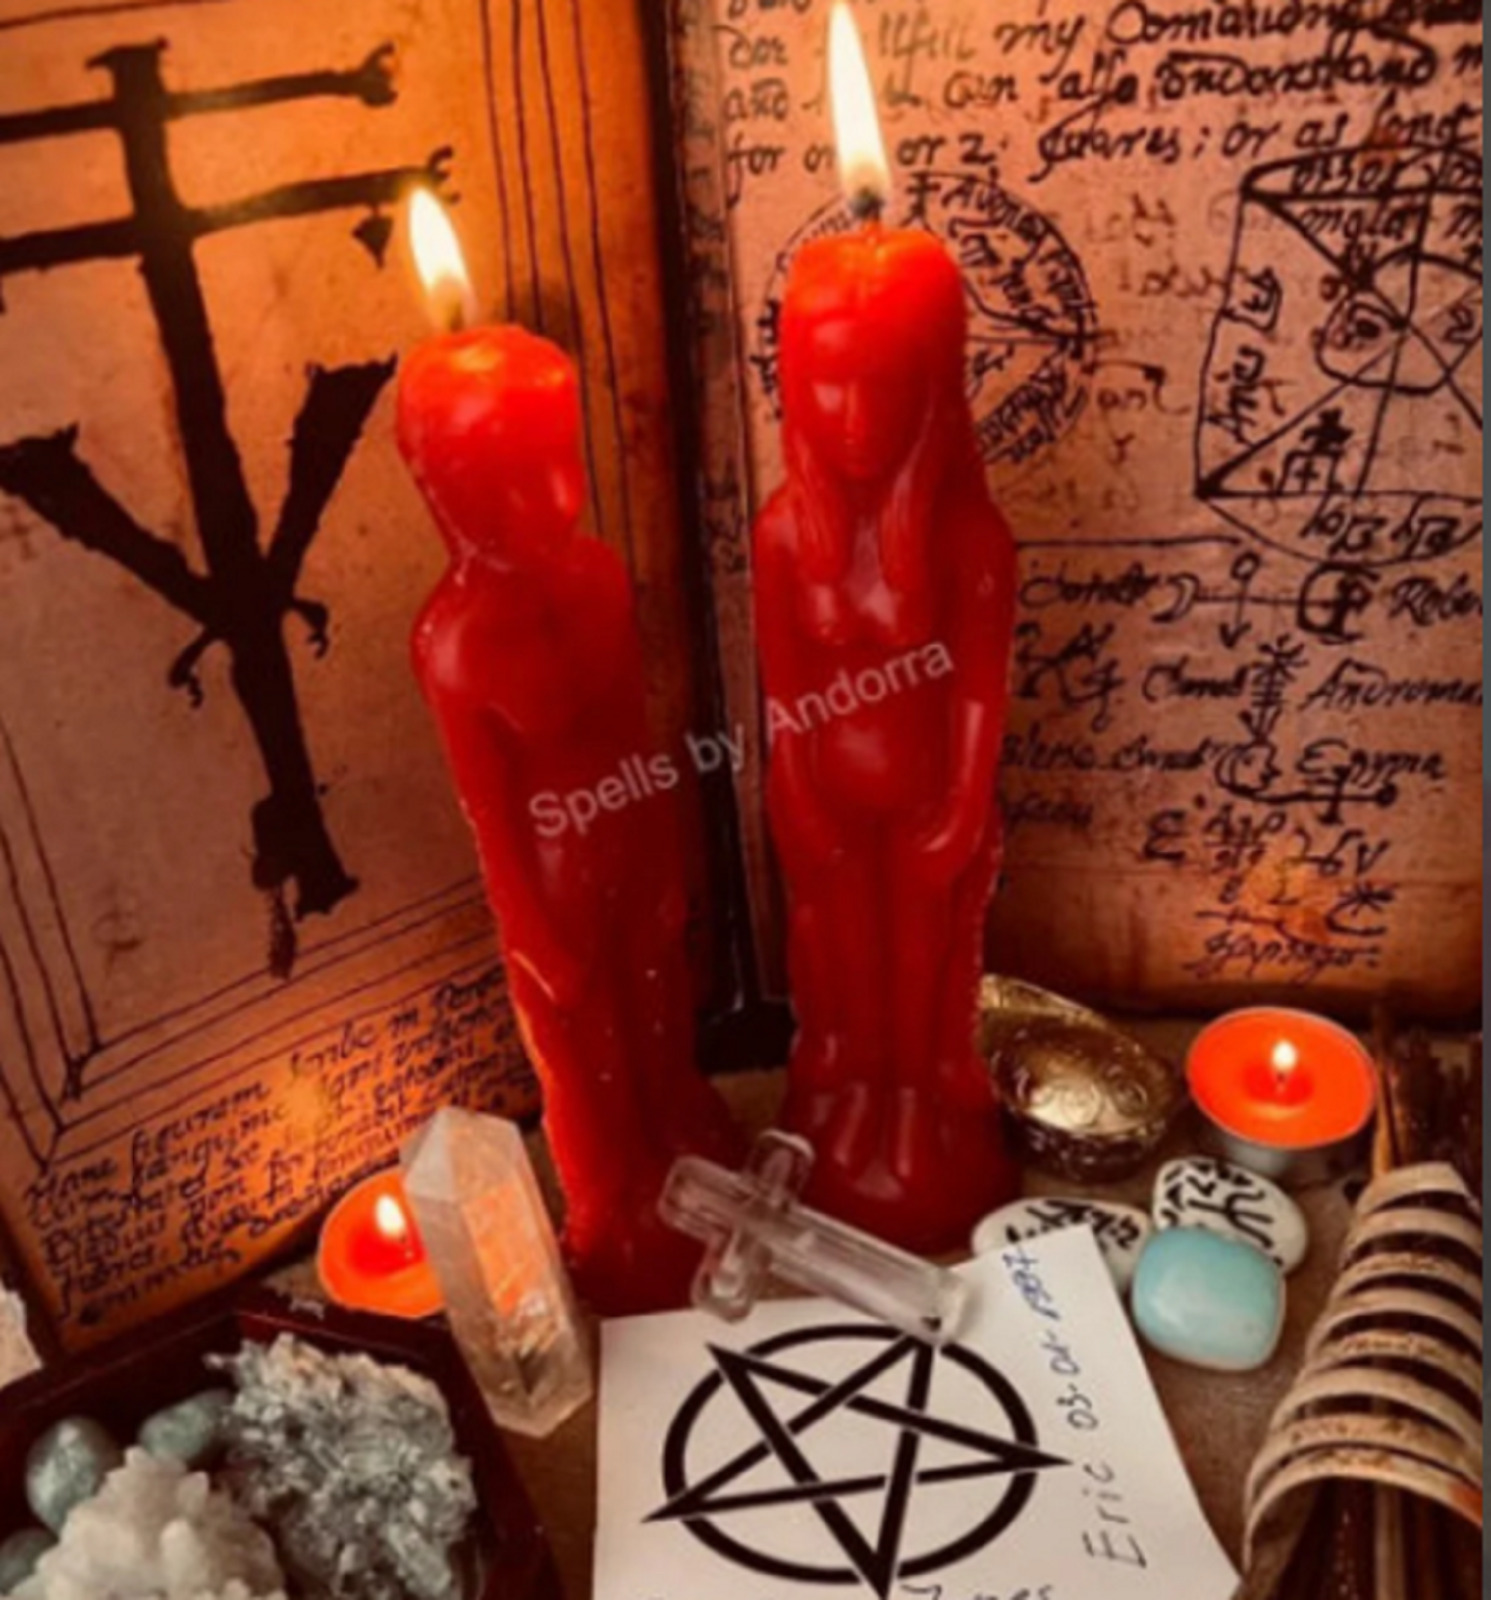 Voodoo - CONTACT ME Spell - Communication Spell Casting - Call me Now Spell